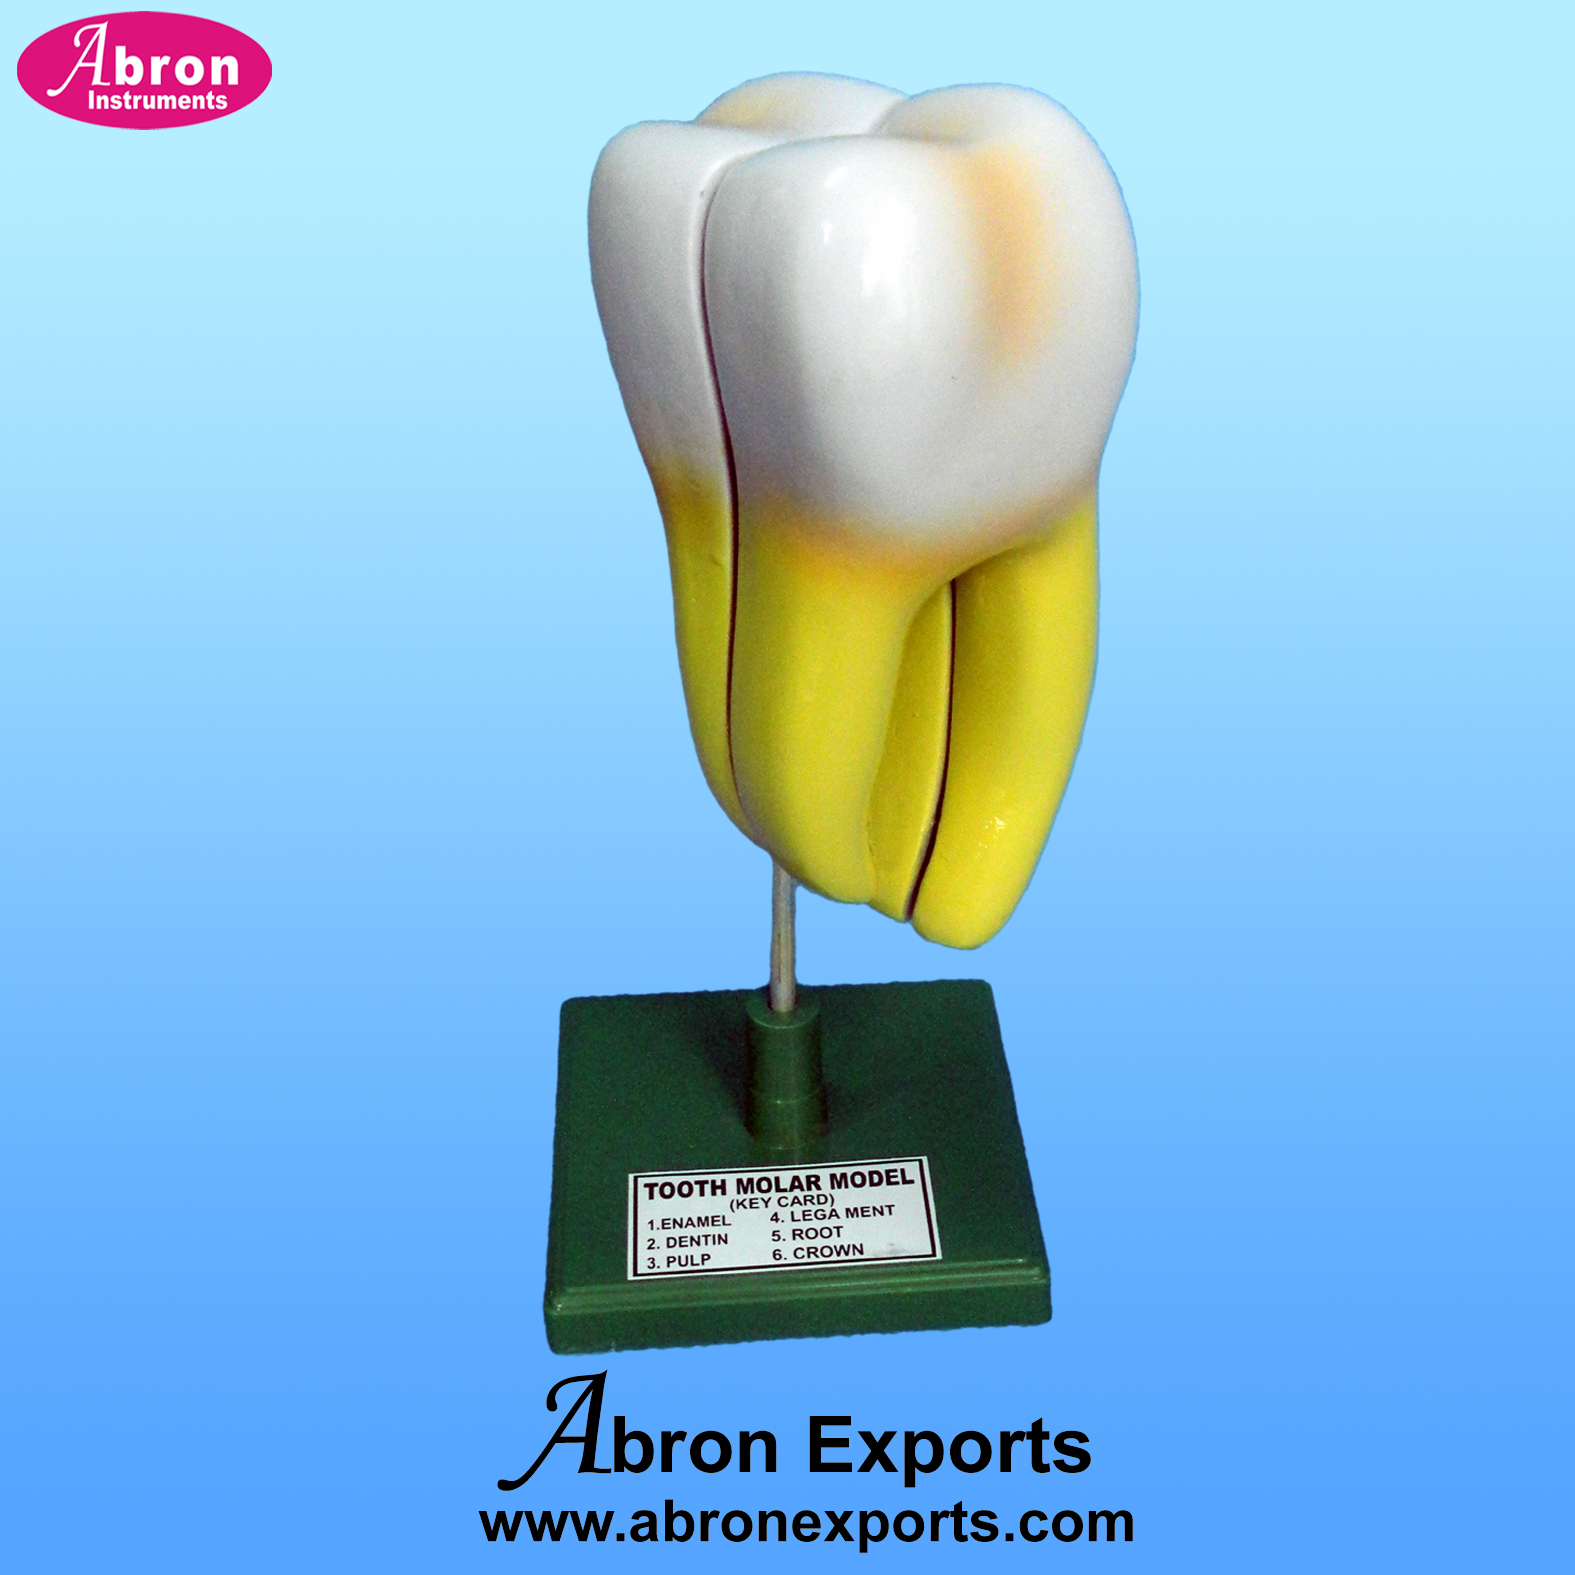 Model fiber tooth molar dissectable showing inner structure model abron AB-131m 